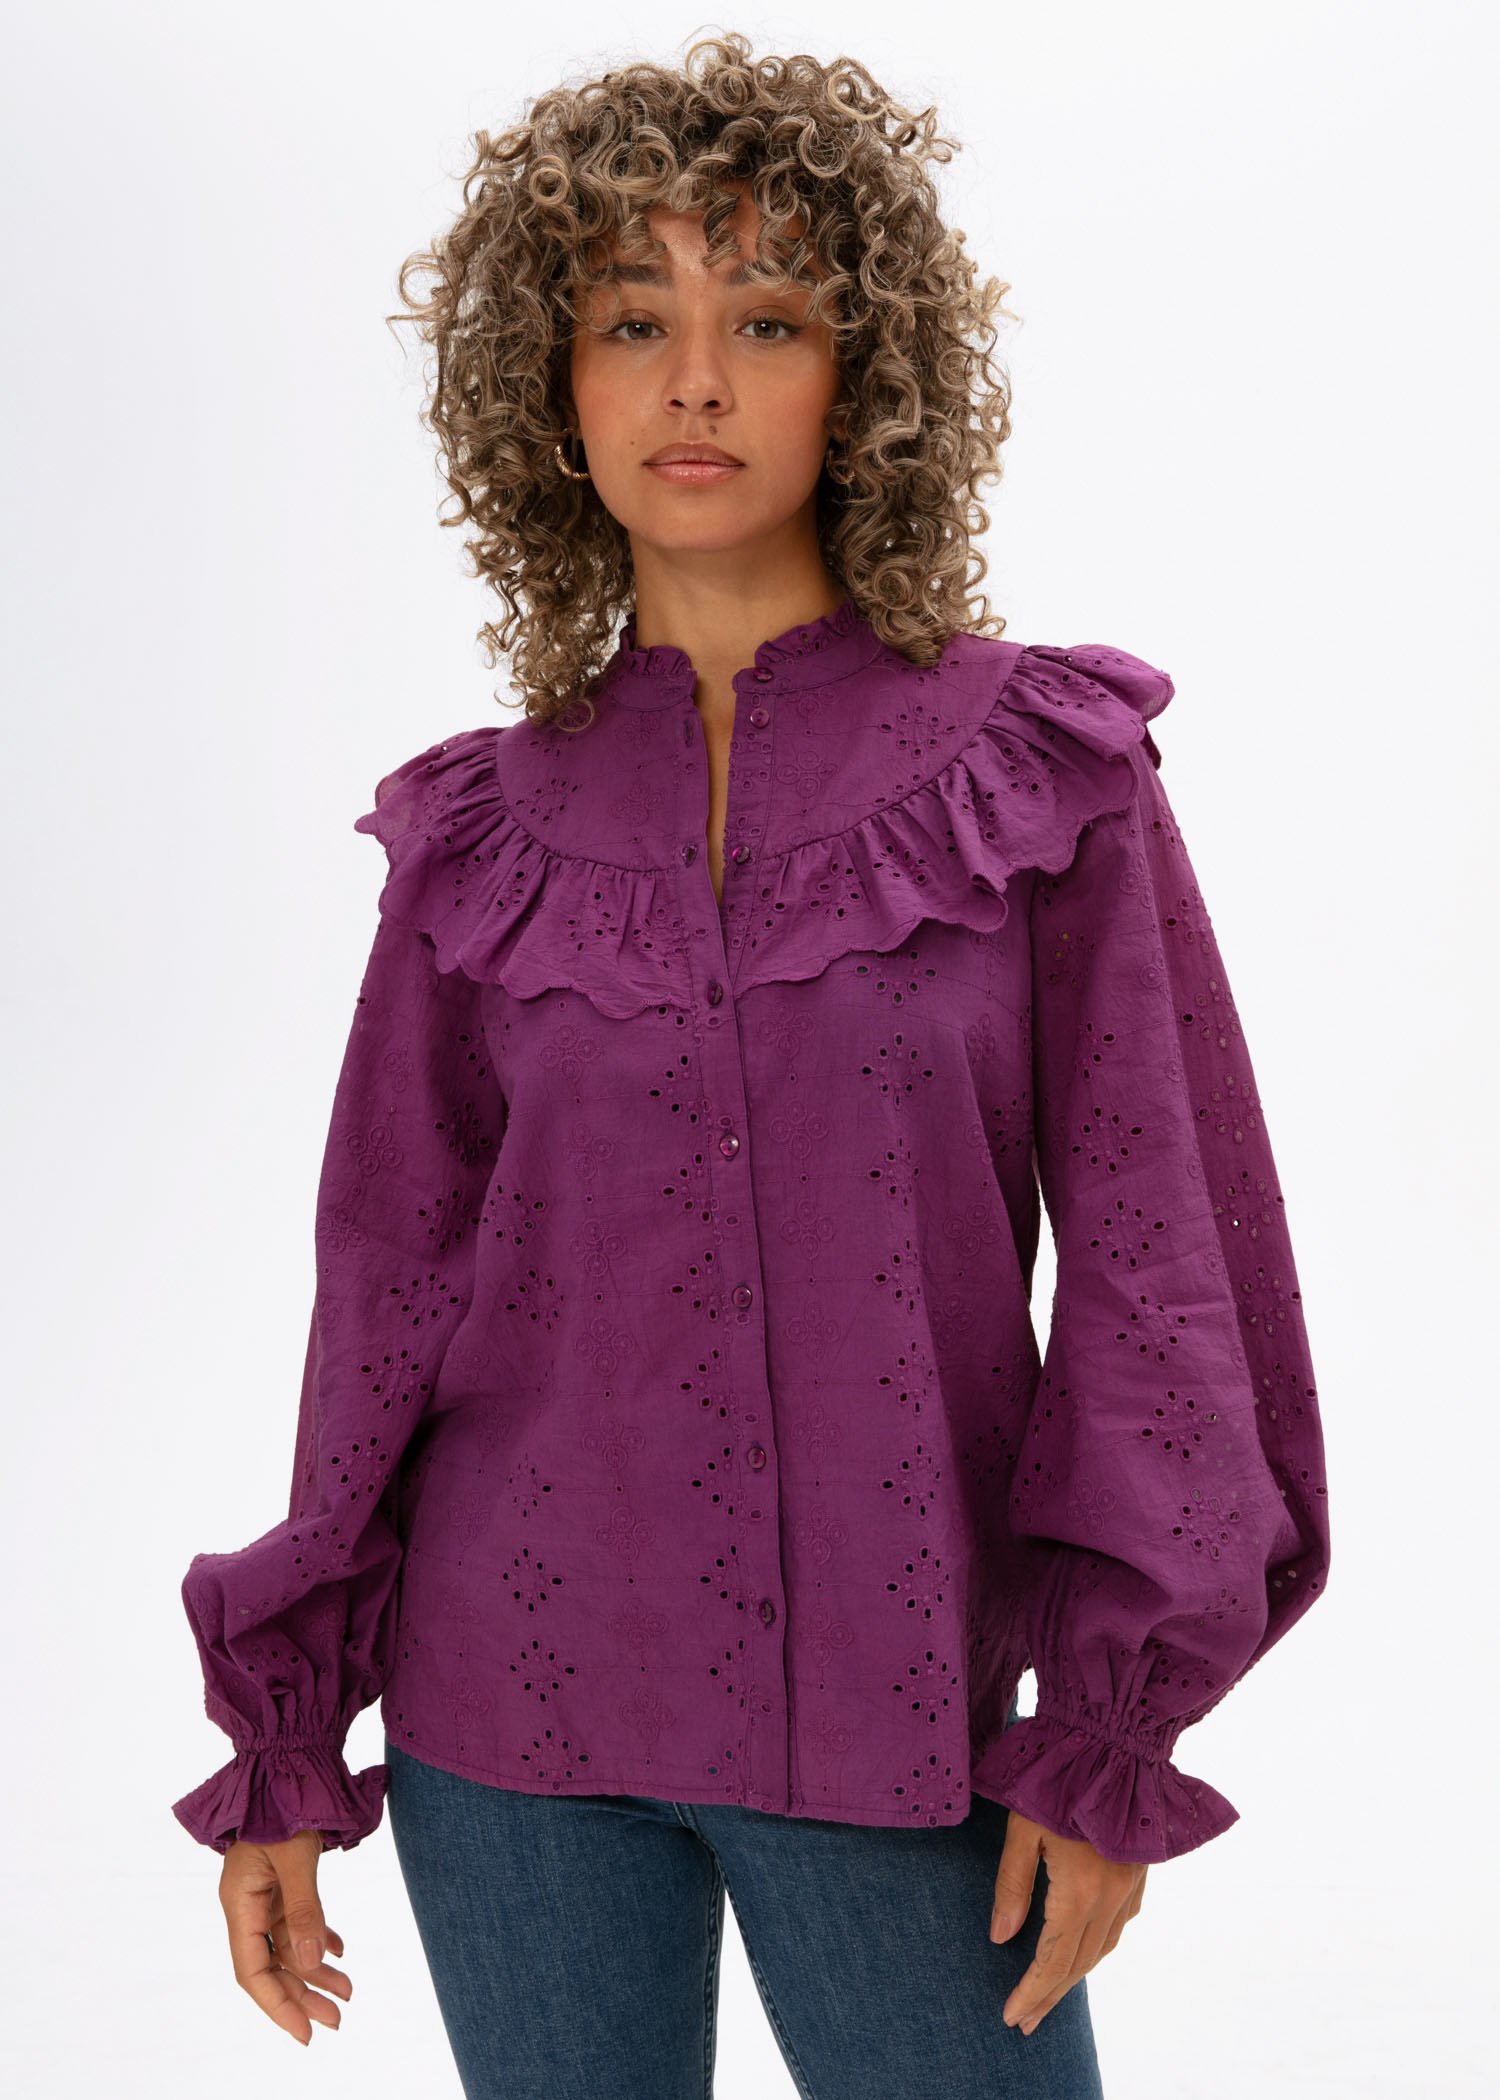 Broderie anglaise blouse